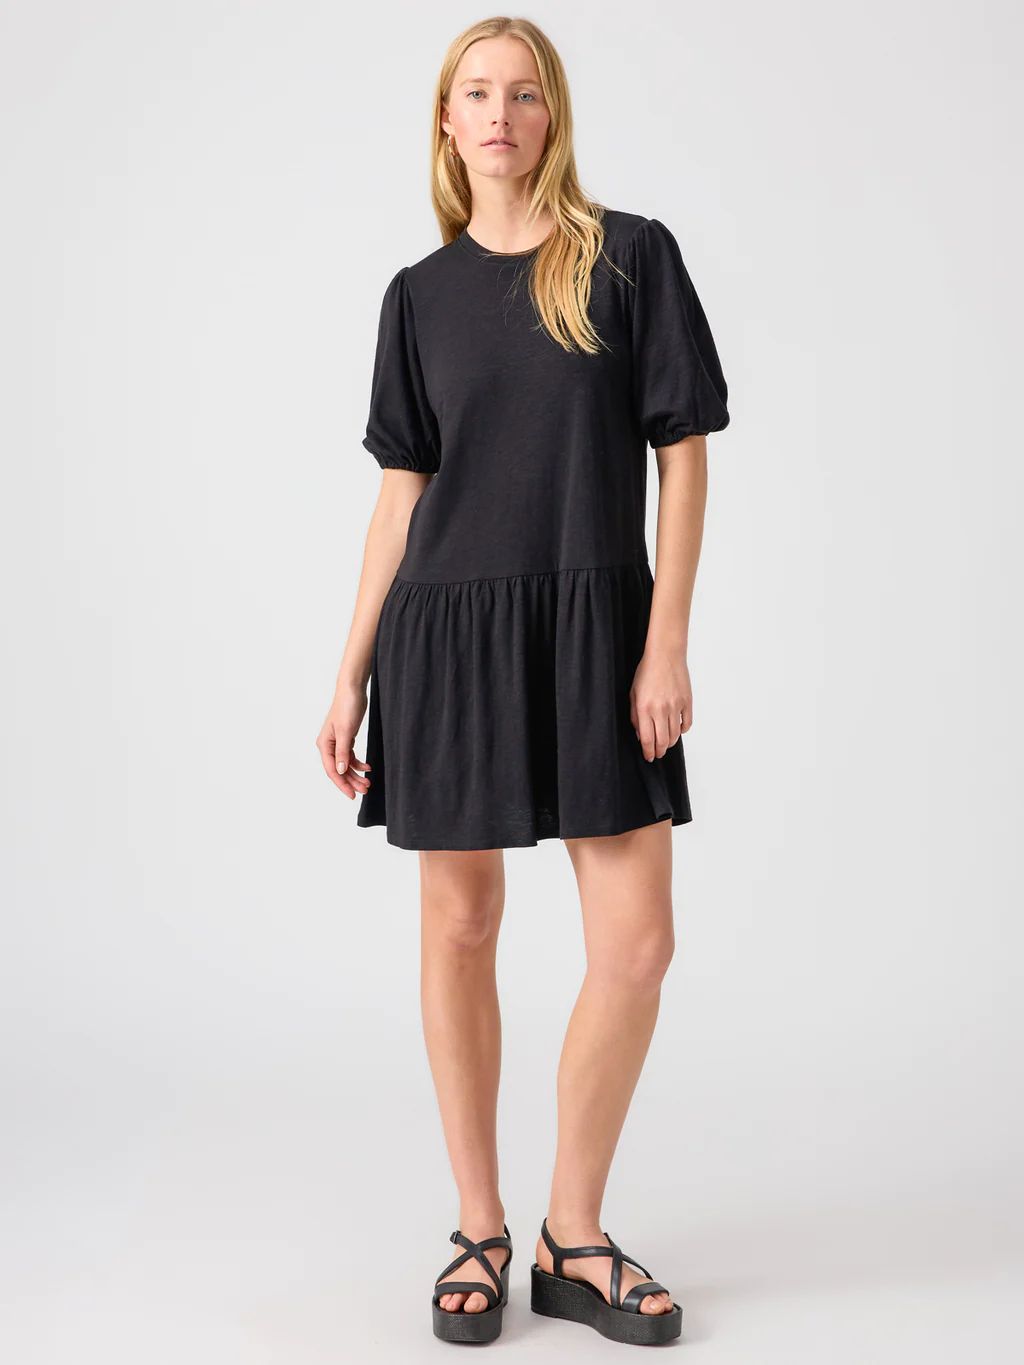 Only Way Knit Dress Black | Sanctuary Clothing